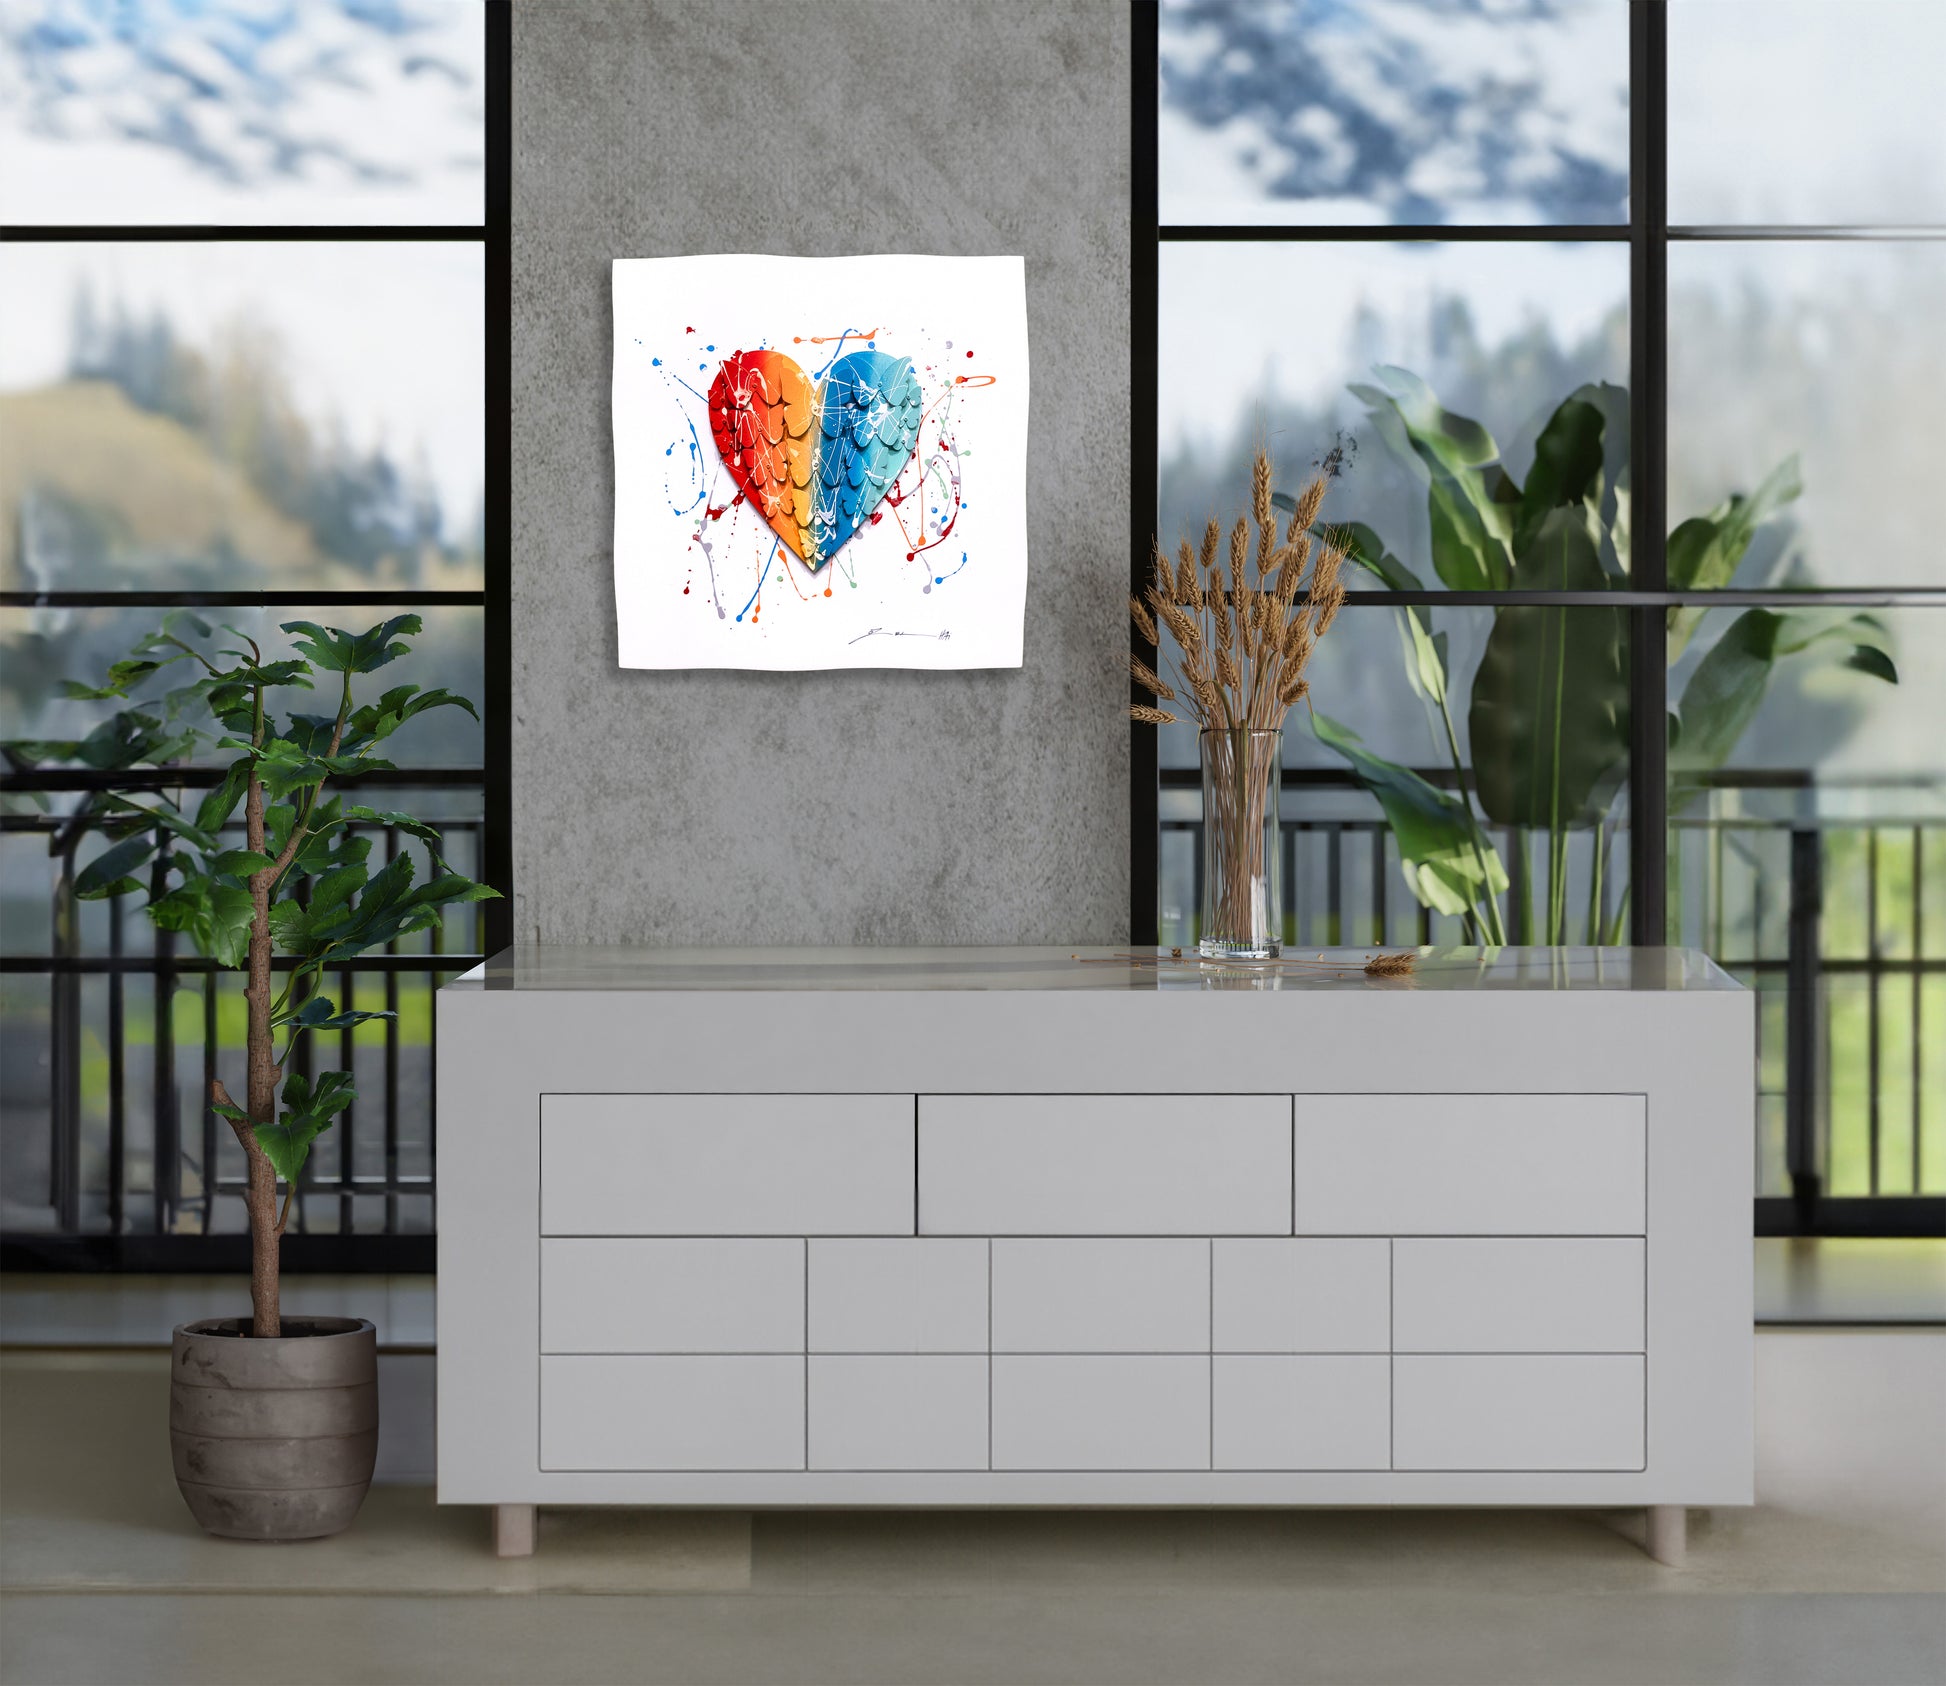 Colorful Heart hanged on wall with nature views behind